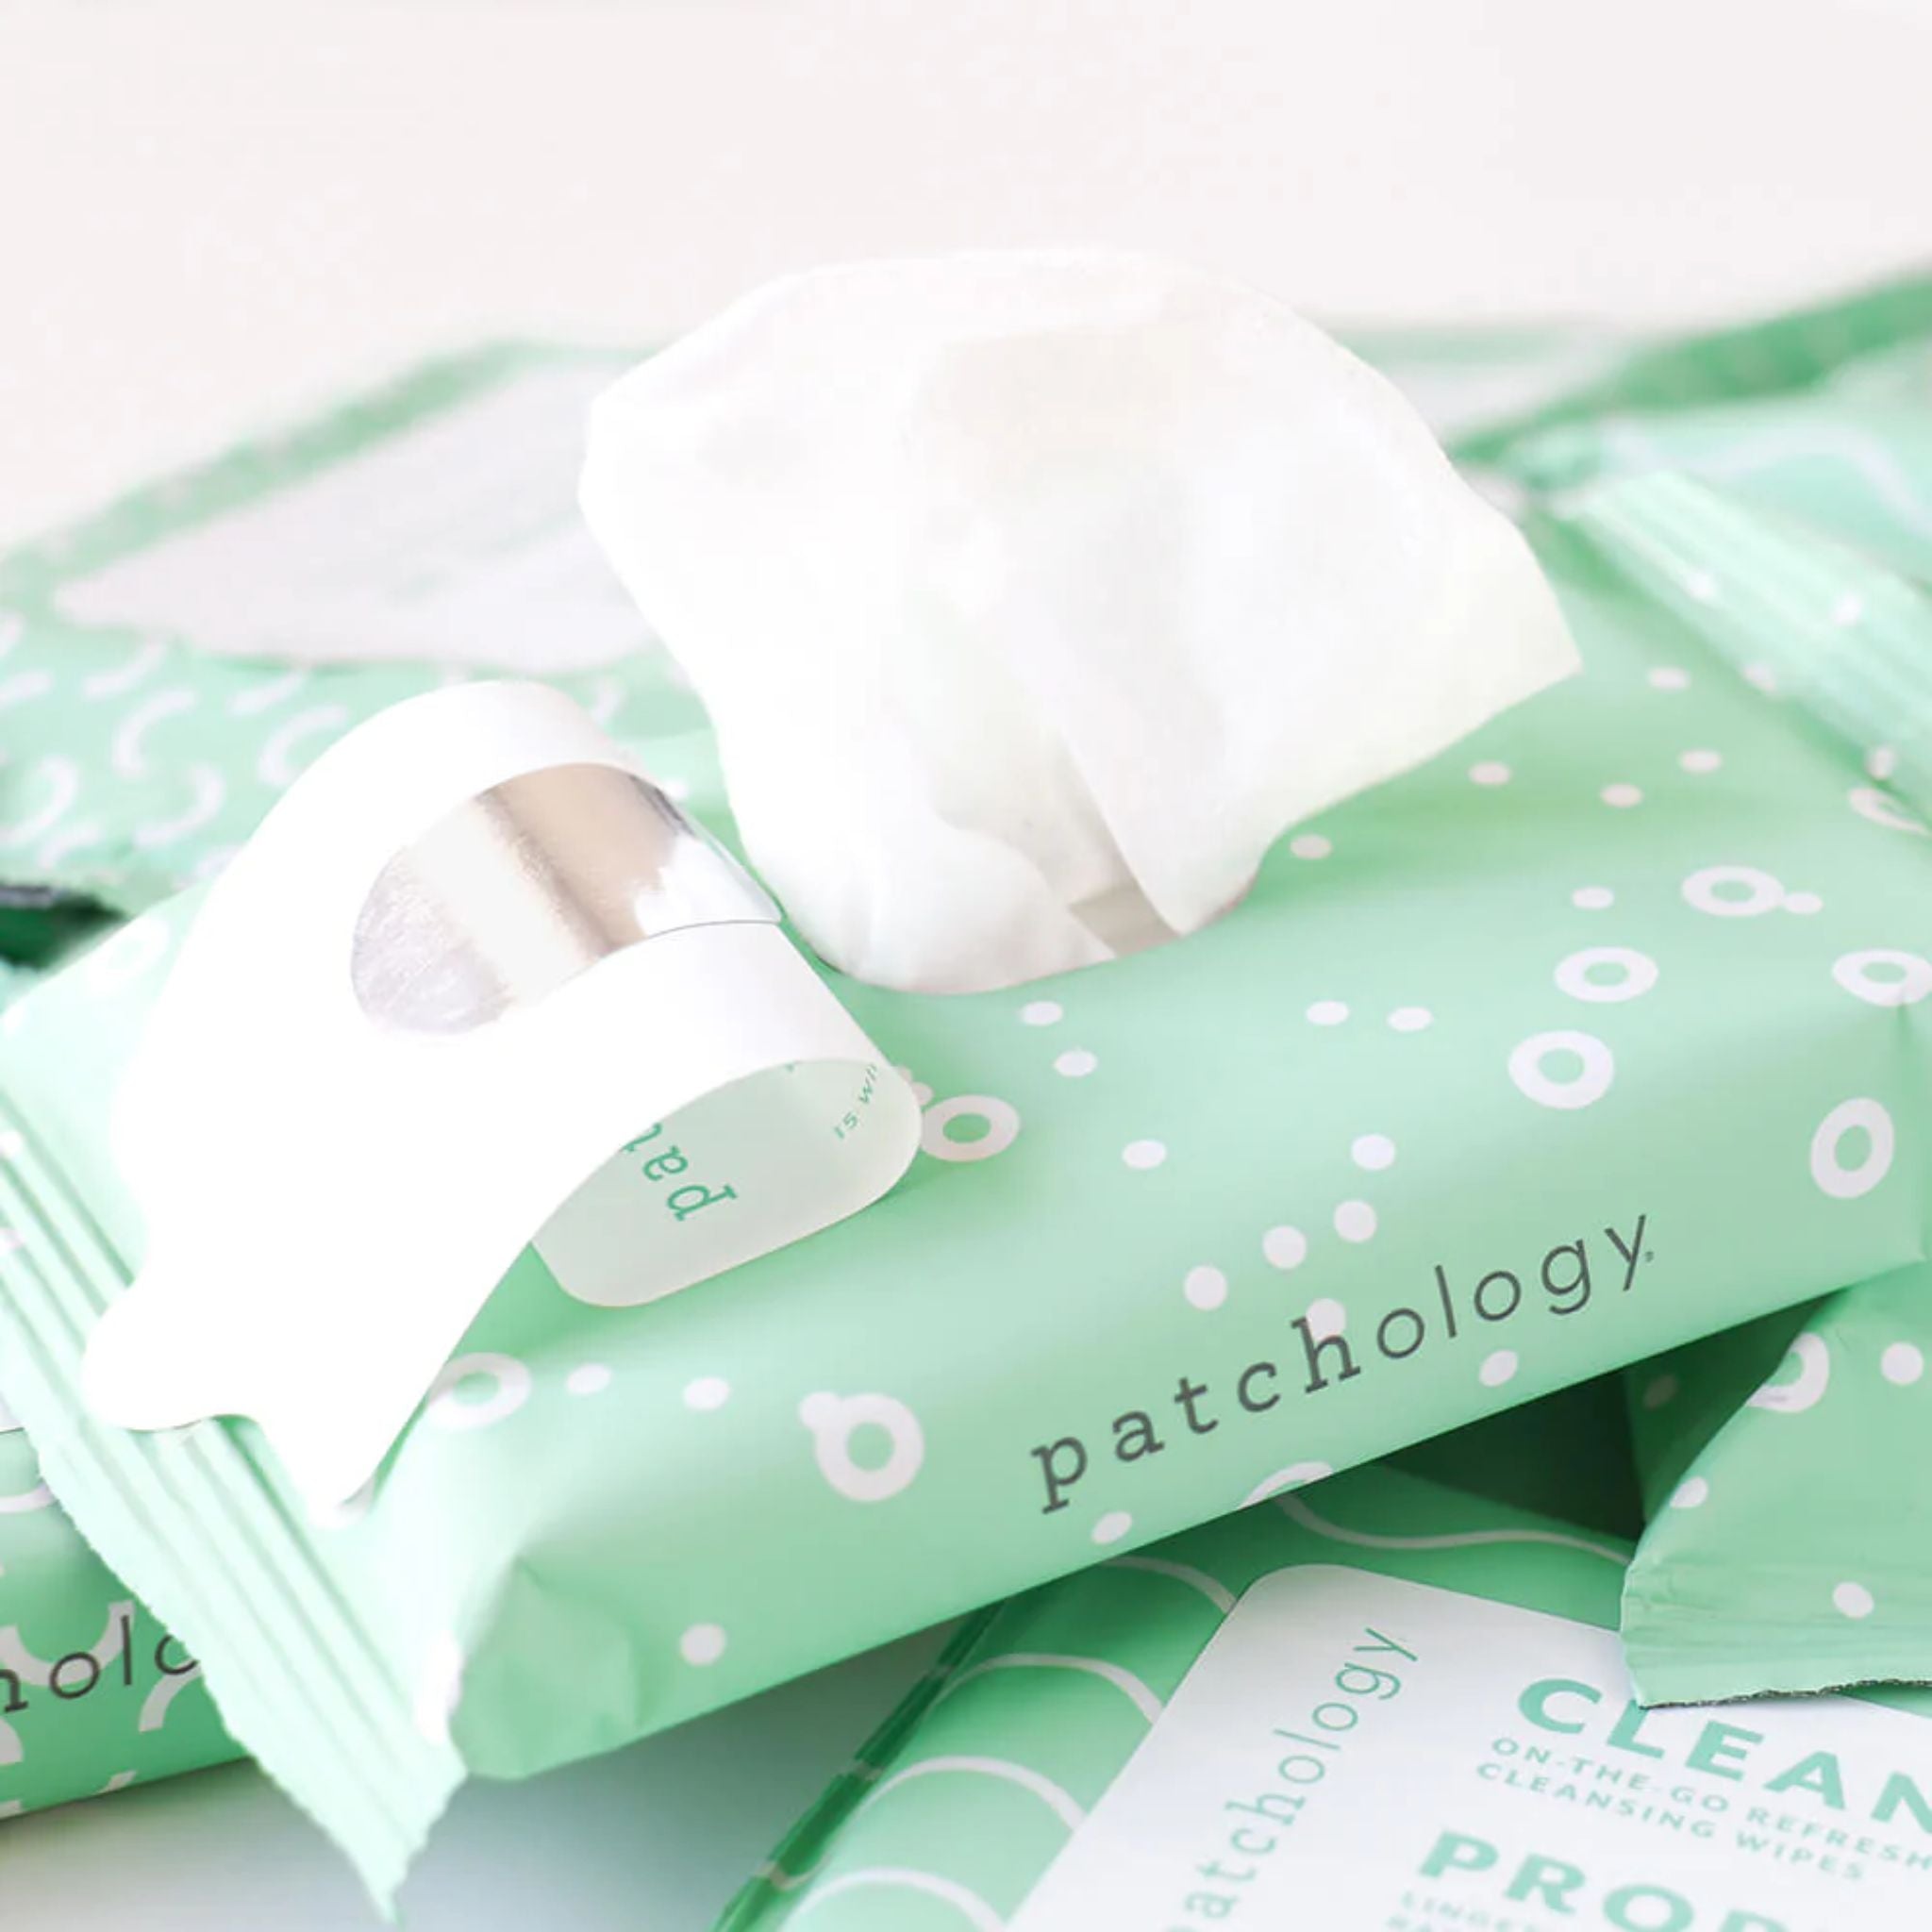 Patchology - Clean AF Facial Cleansing Wipes 15